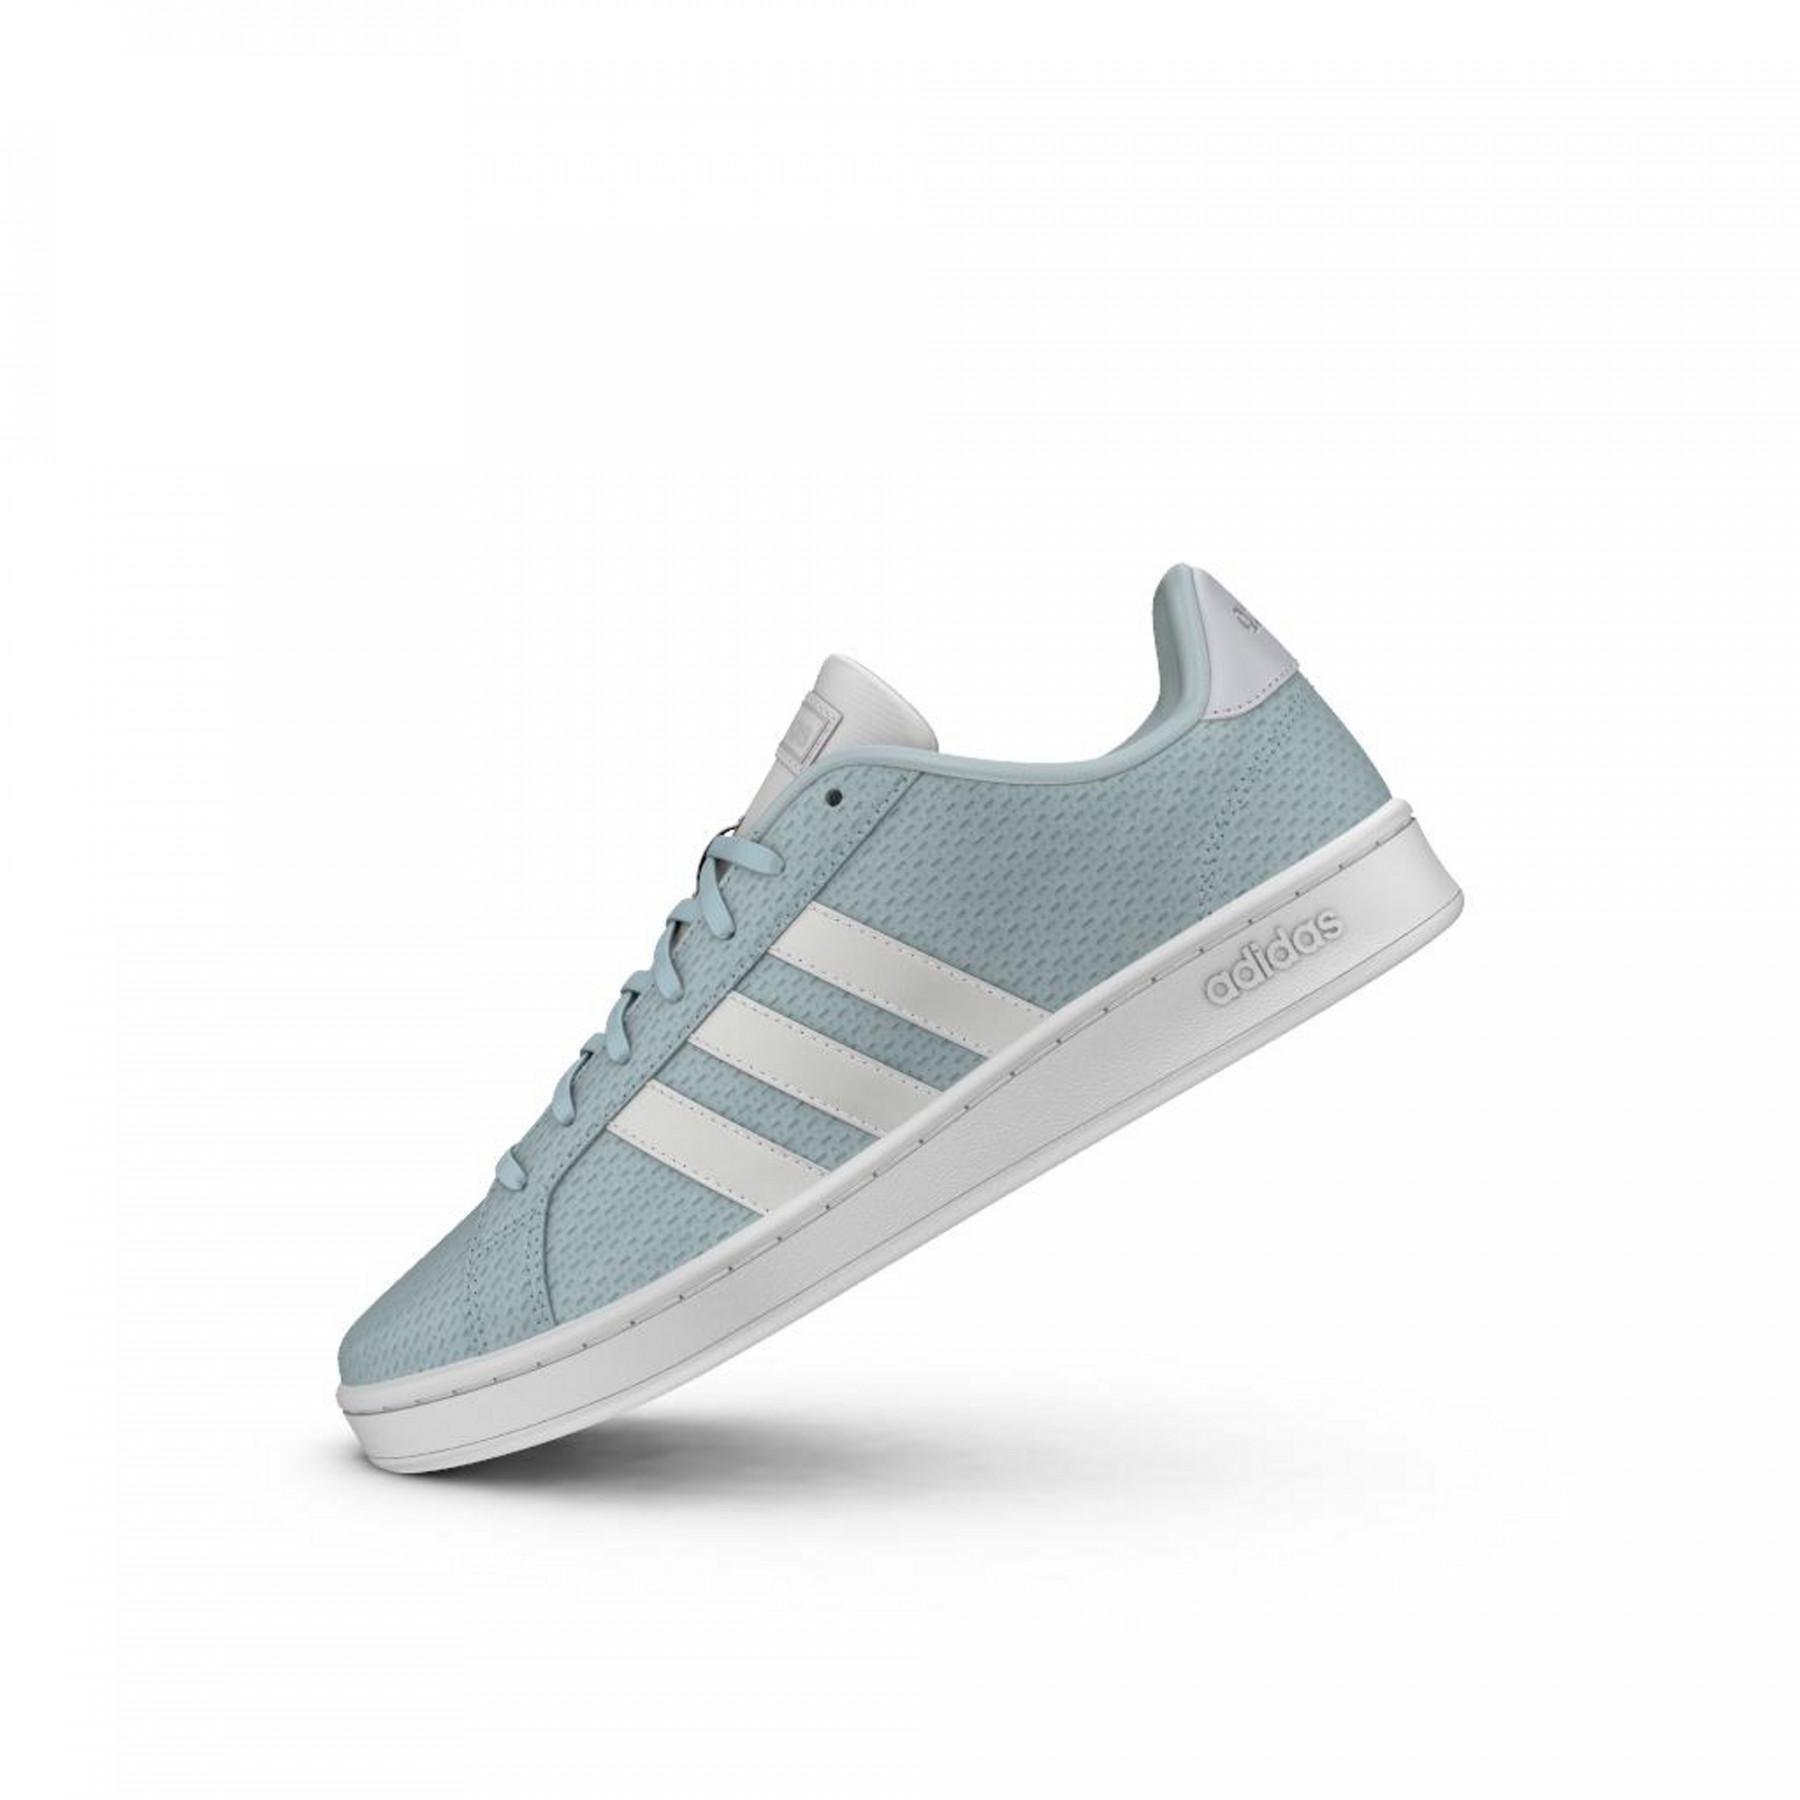 Women's sneakers adidas Grand Court